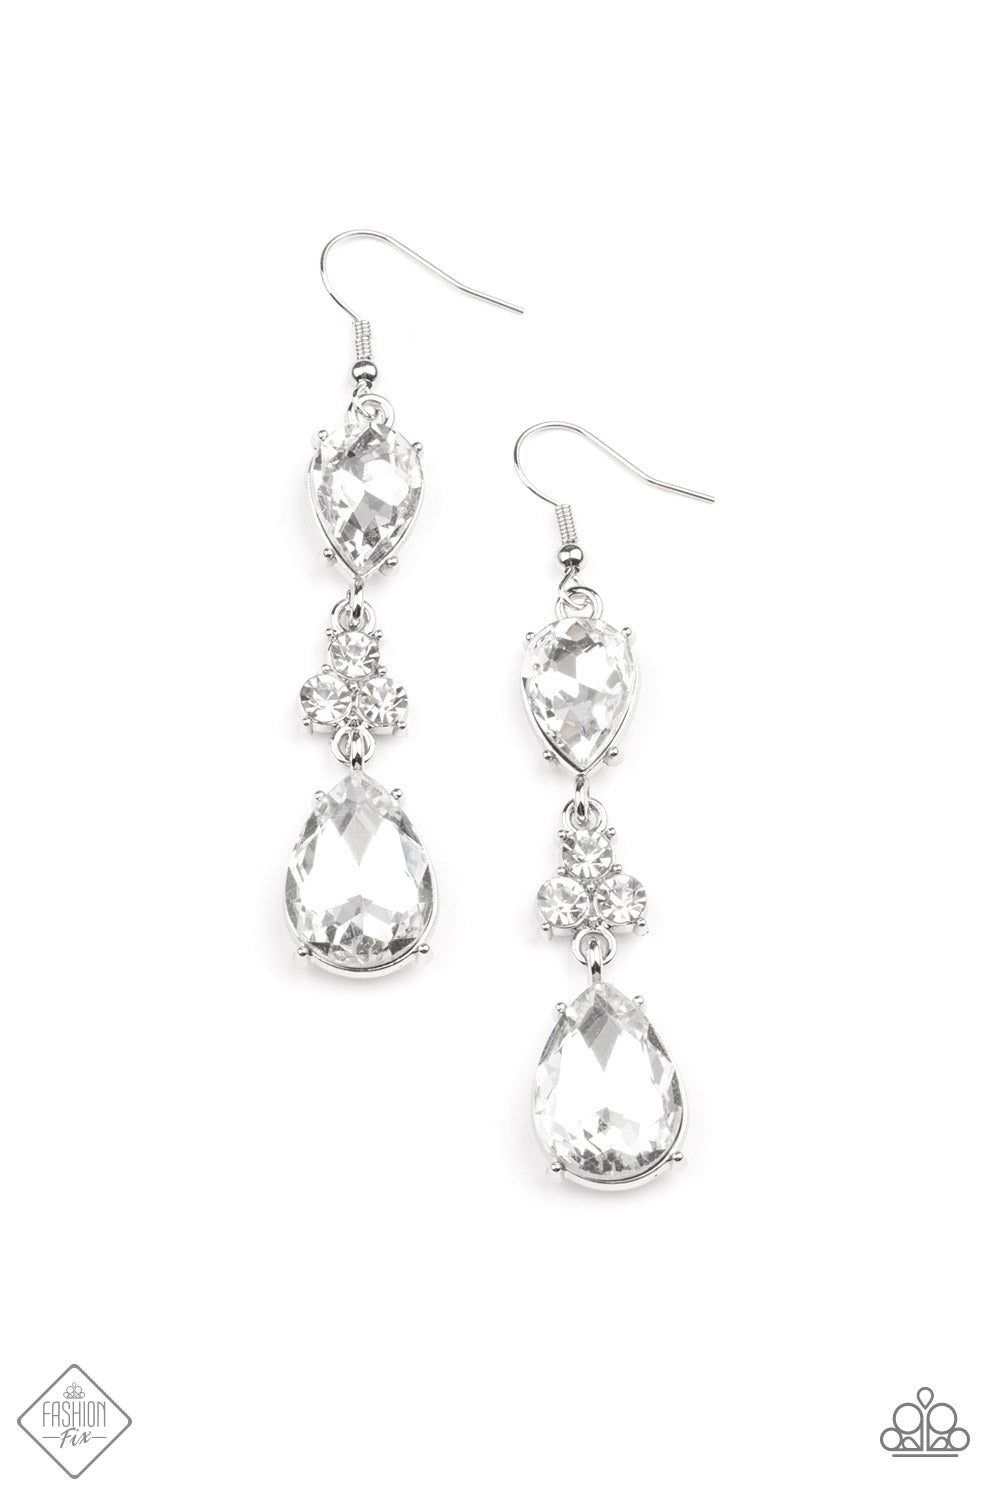 Paparazzi Once Upon a Twinkle White Earring-Fashion Fix-May 2021